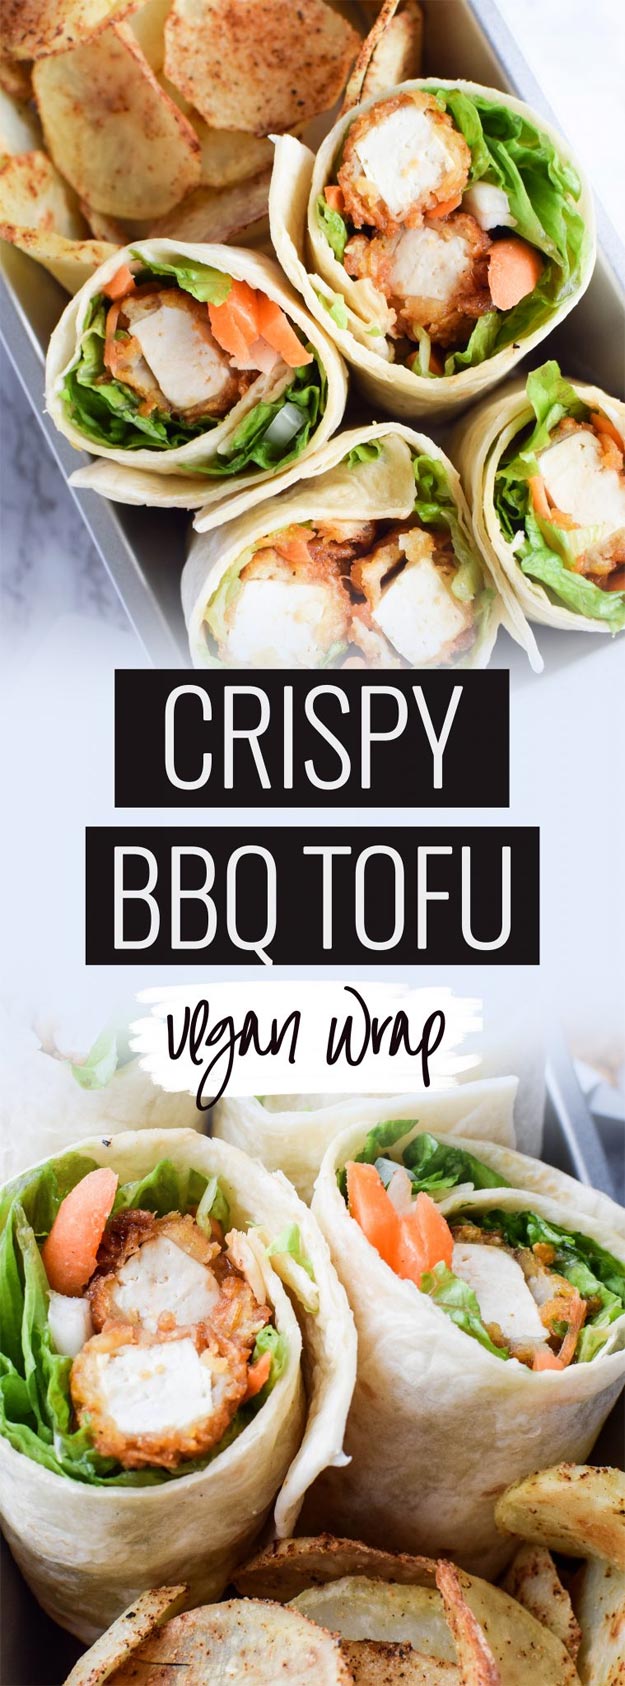 Easy Healthy Lunch Ideas - Crispy BBQ Tofu Wraps Recipe - School Lunch Box Ideas - Cheap Lunch Meal Prep for Work - How to Make the Best School Lunch - Meal Recipes To Go - Recipes for Lunch At Home #easylunchideas #healthylunches #lunchrecipes